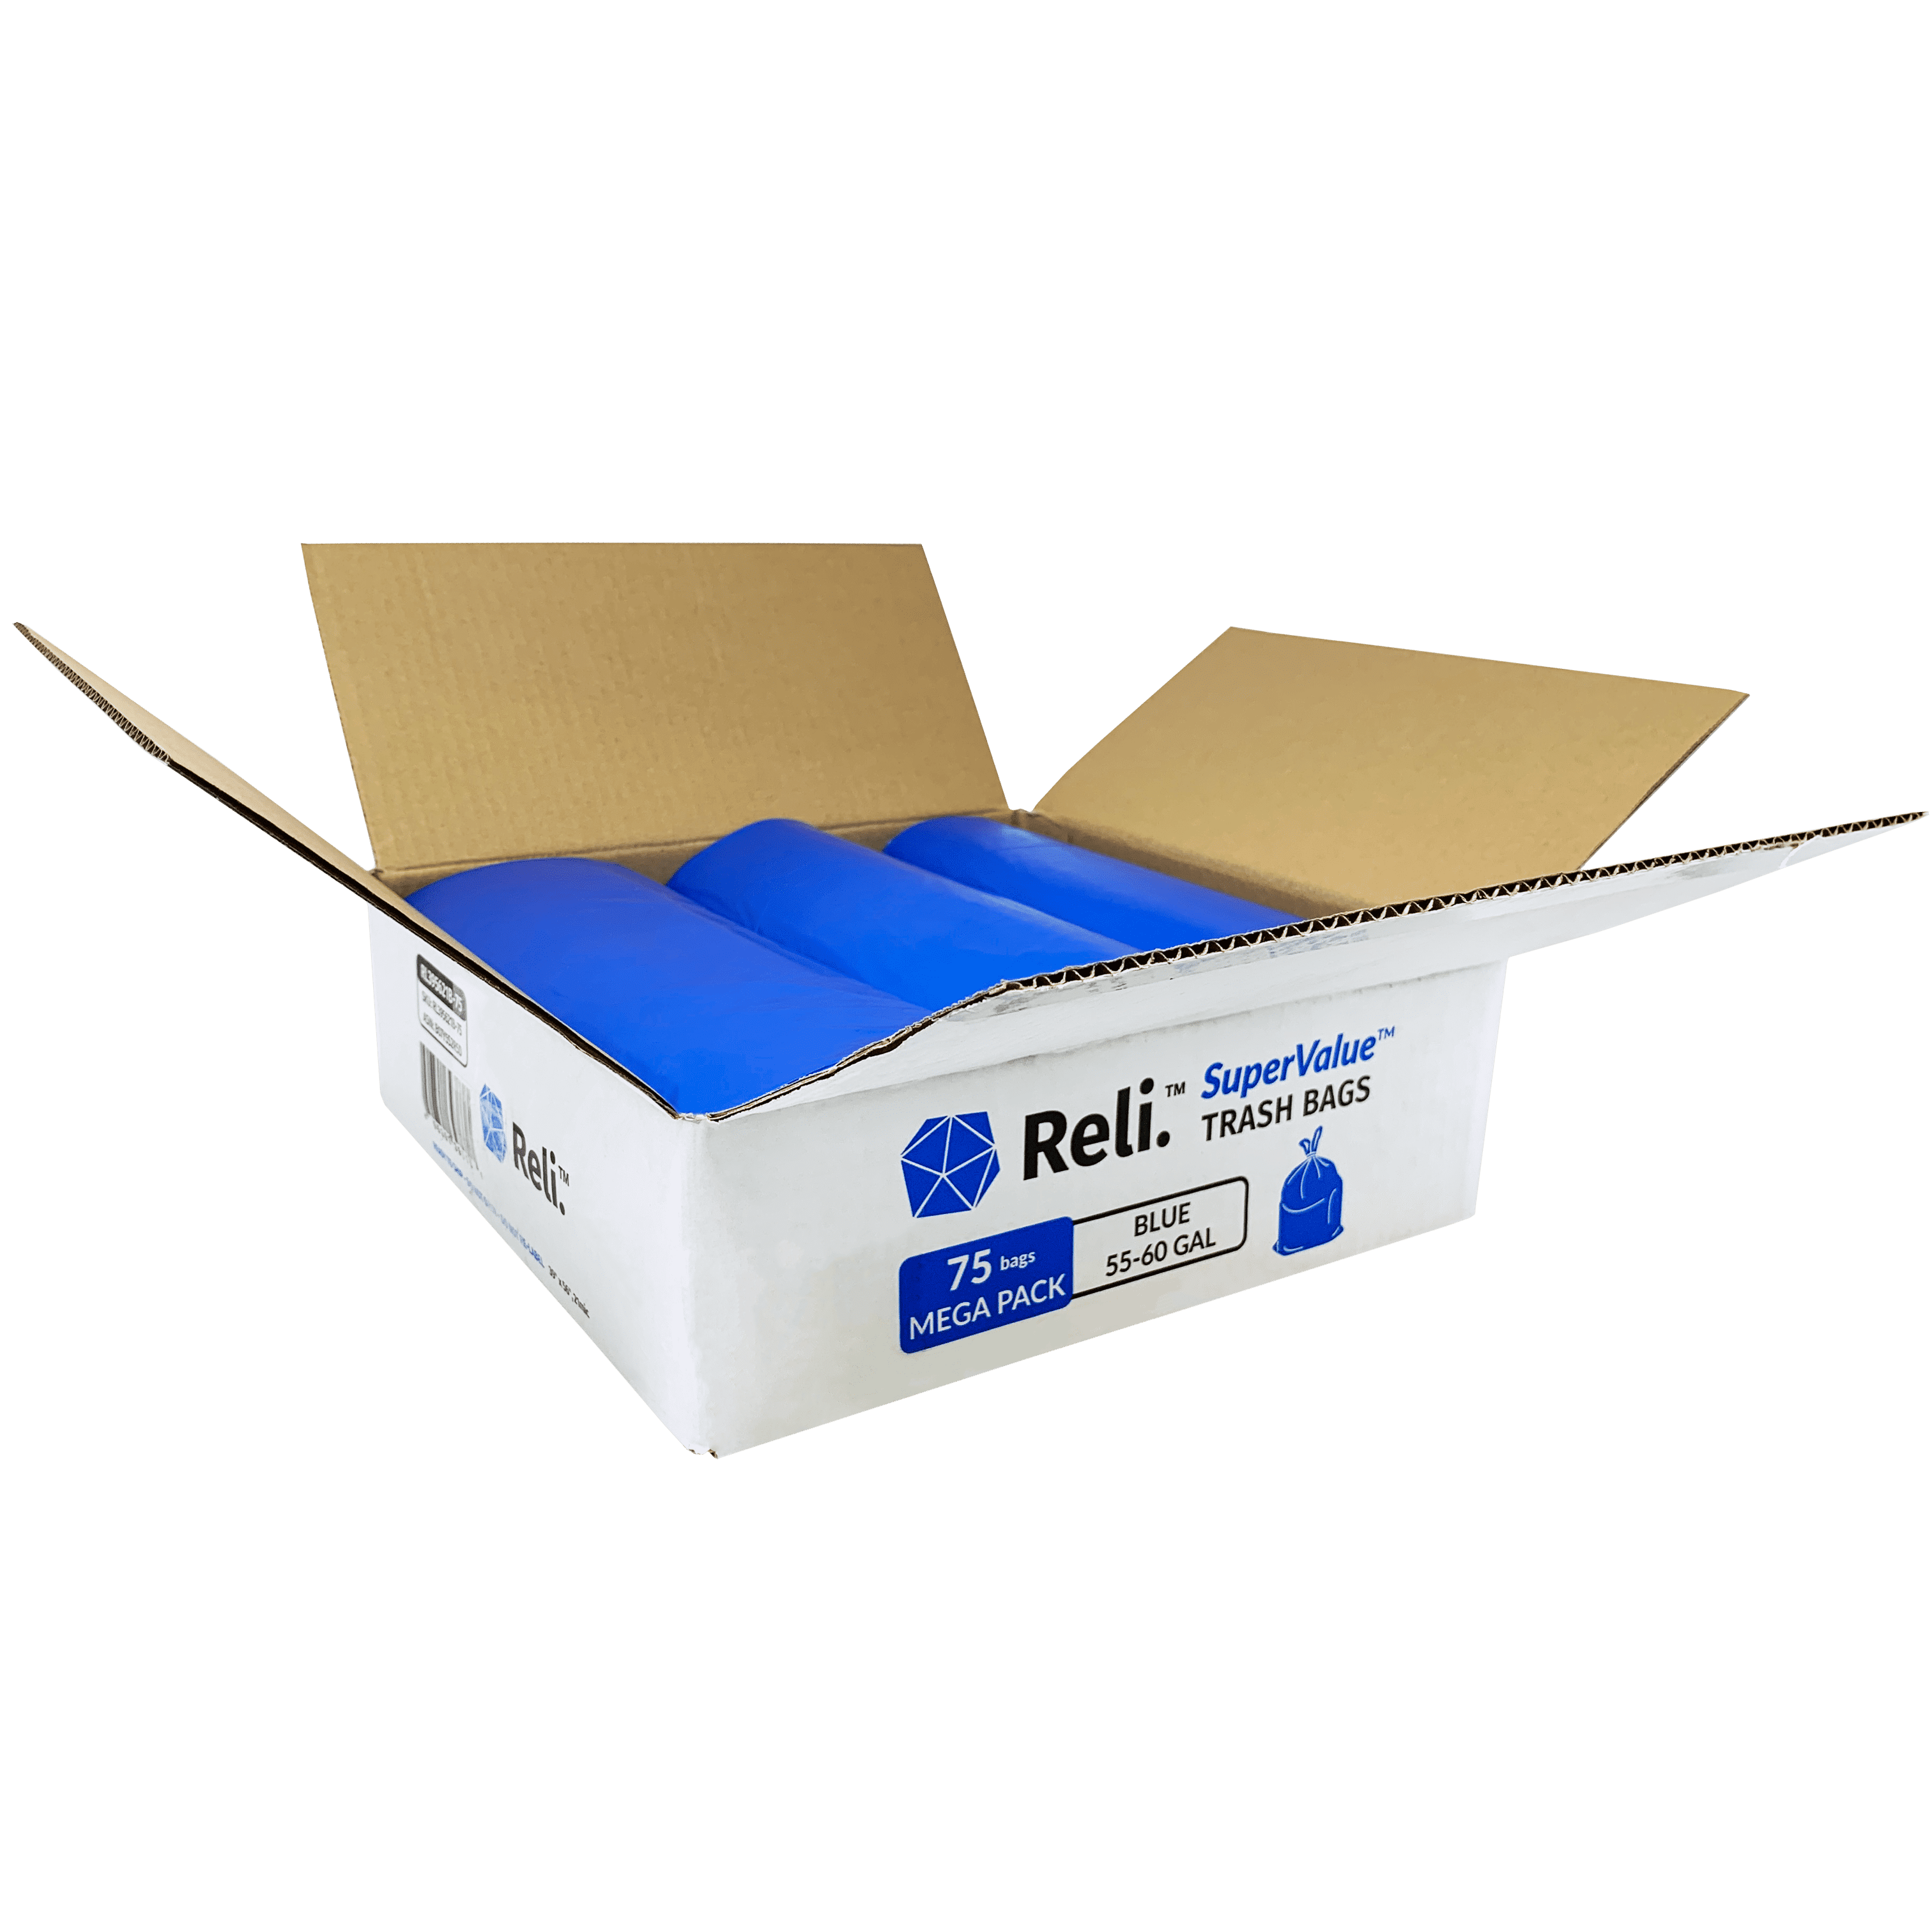 Reli. 2-4 Gallon Trash Bags, Small Recycling Blue Garbage Bags